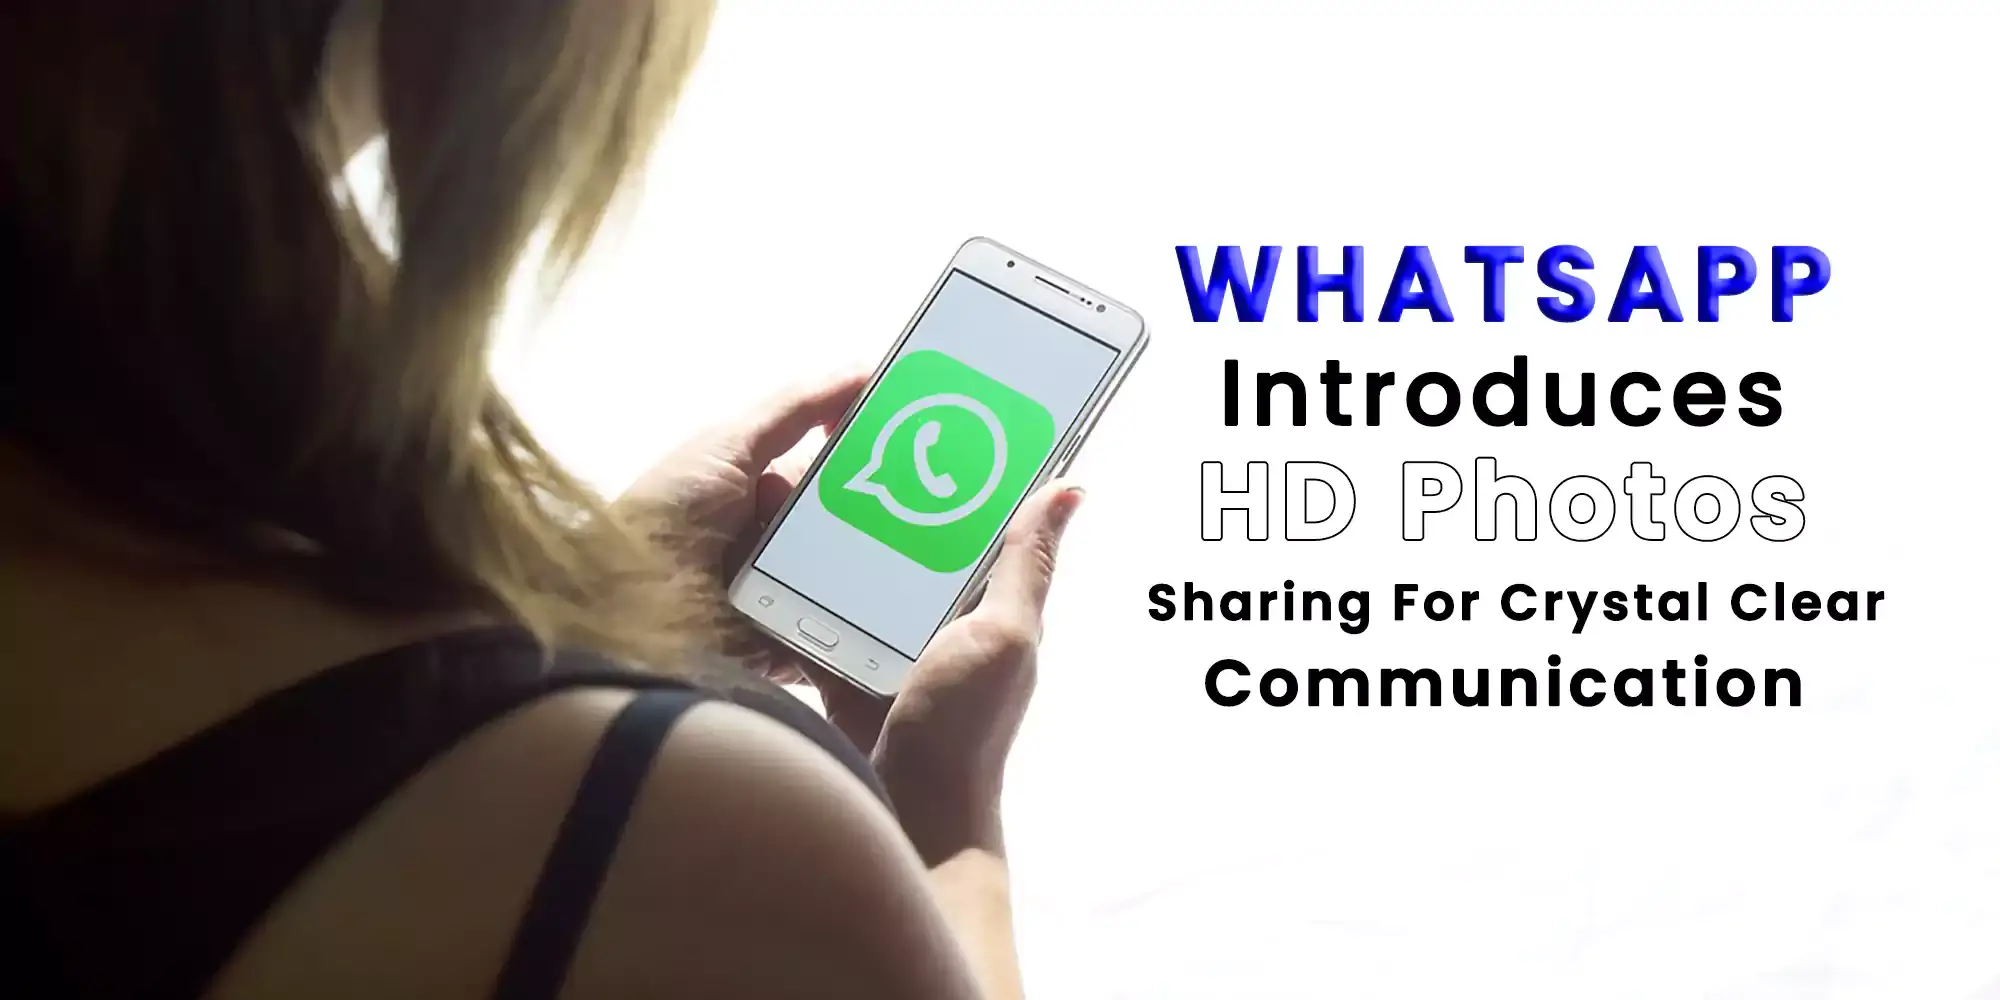 WhatsApp HD Photo Sharing For Crystal Clear Communication